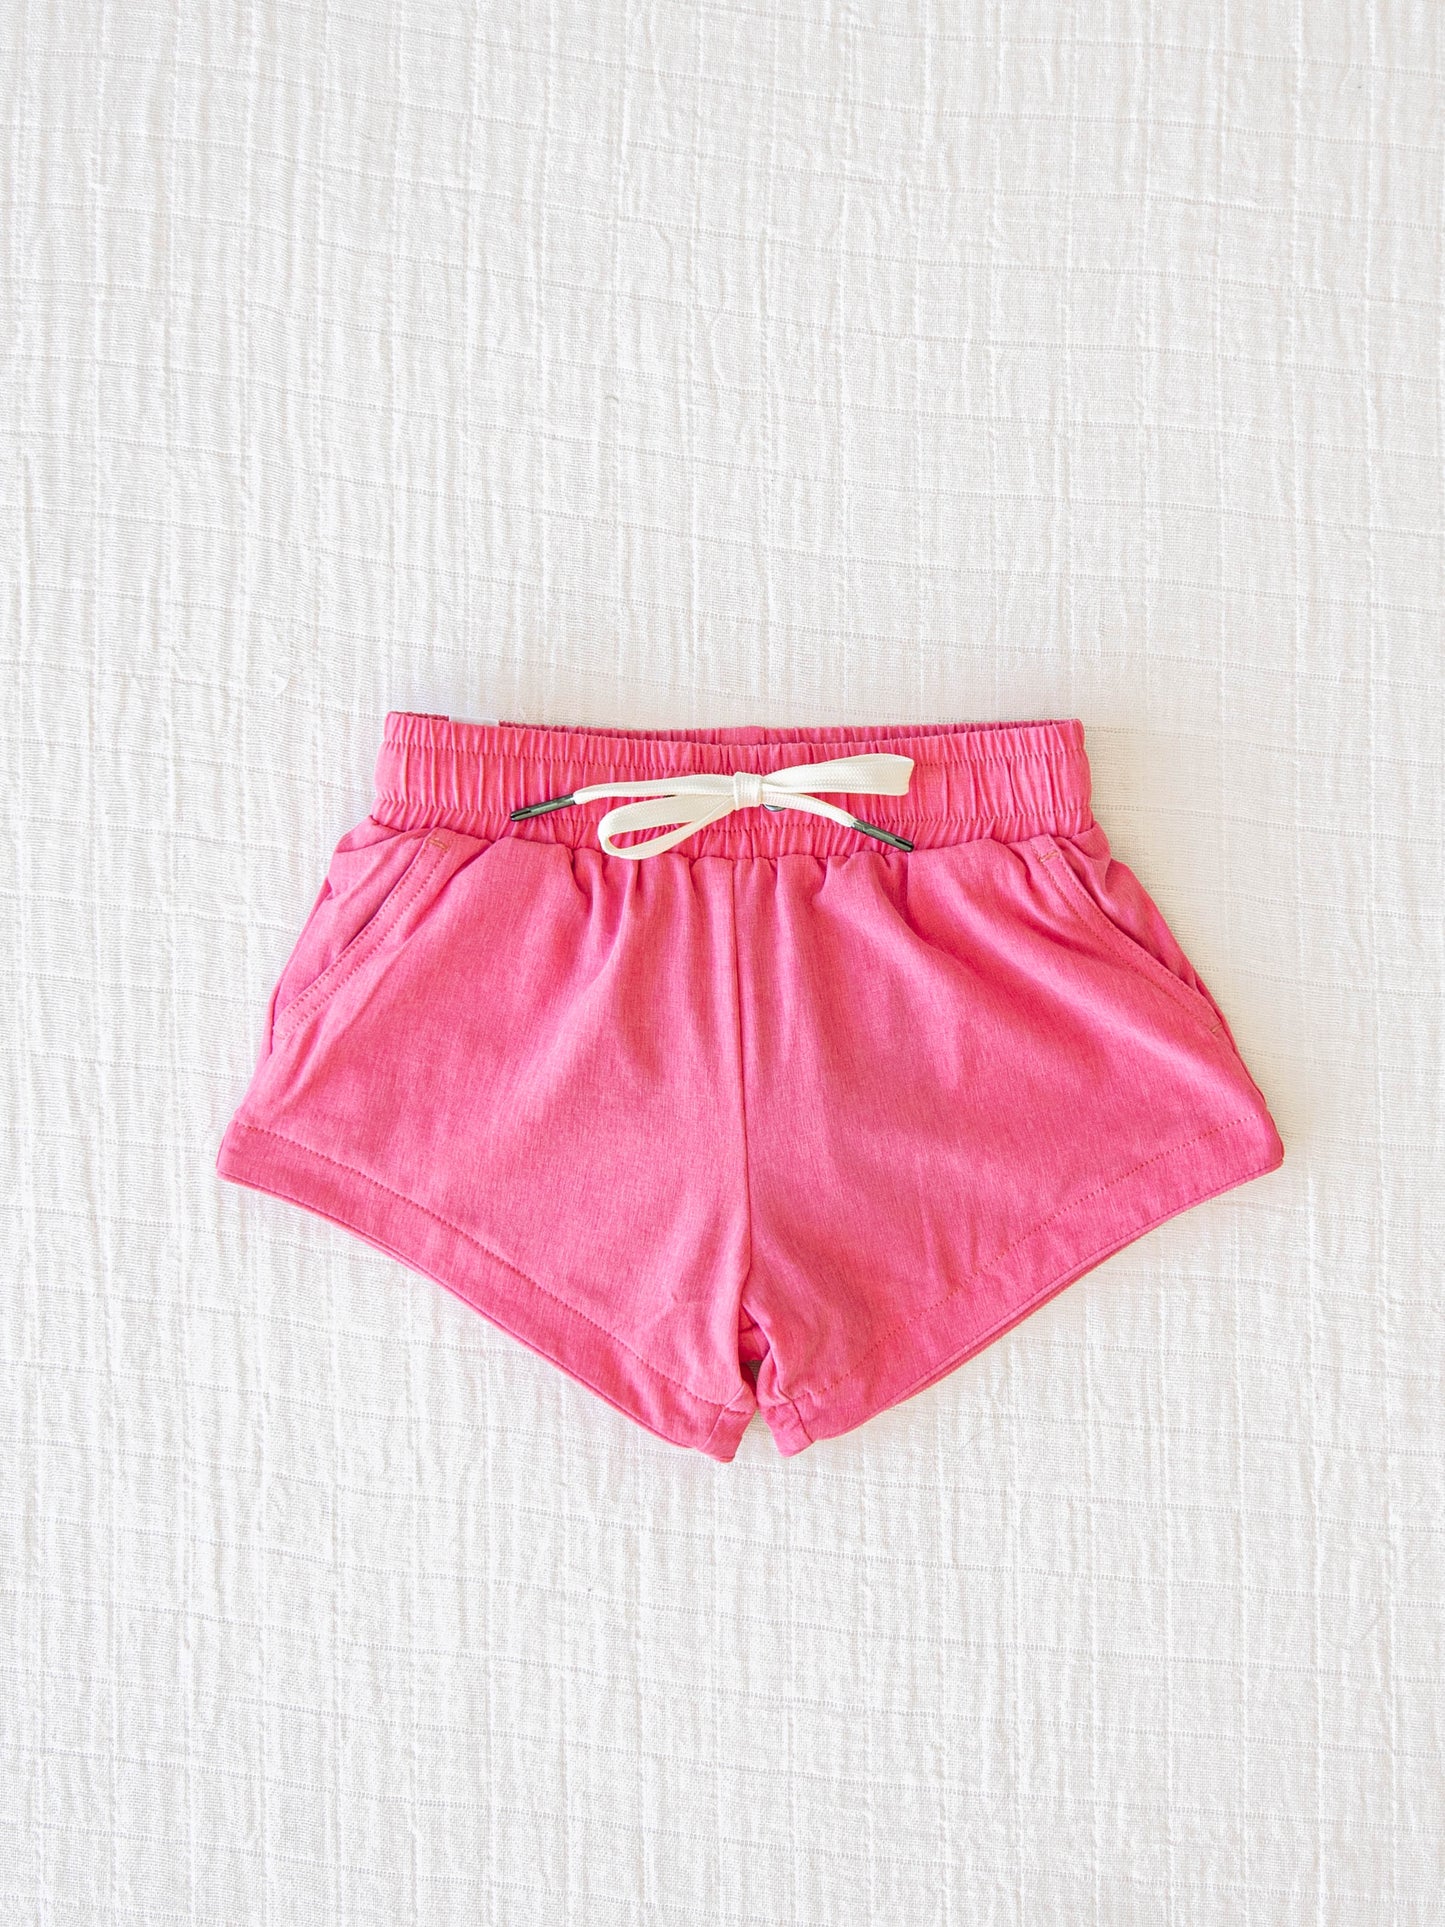 European cut style of our Boy's Everyday Lined Trunks – Magenta Solid